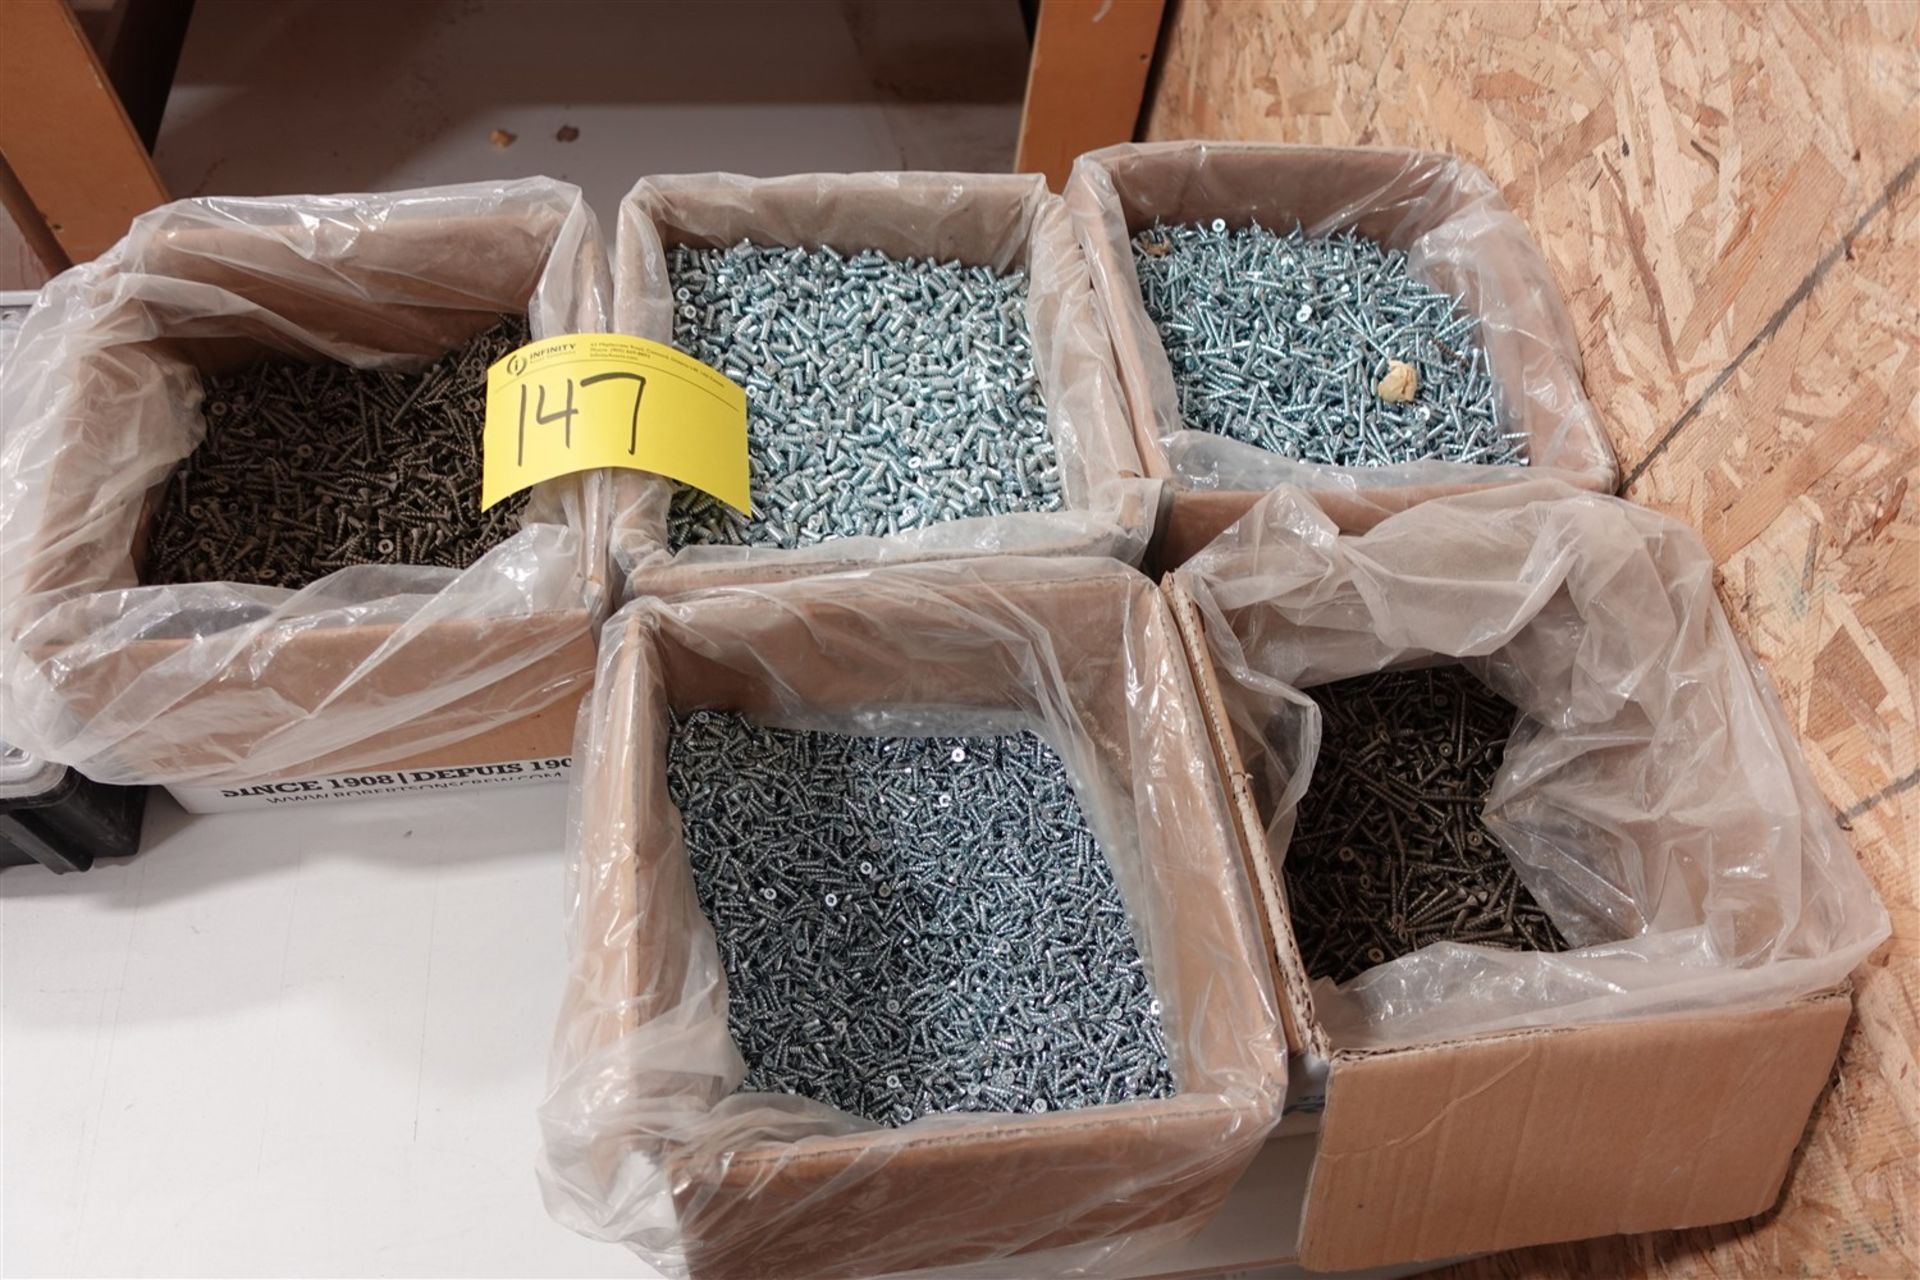 5 BOXES OF ASSORTED SCREWS